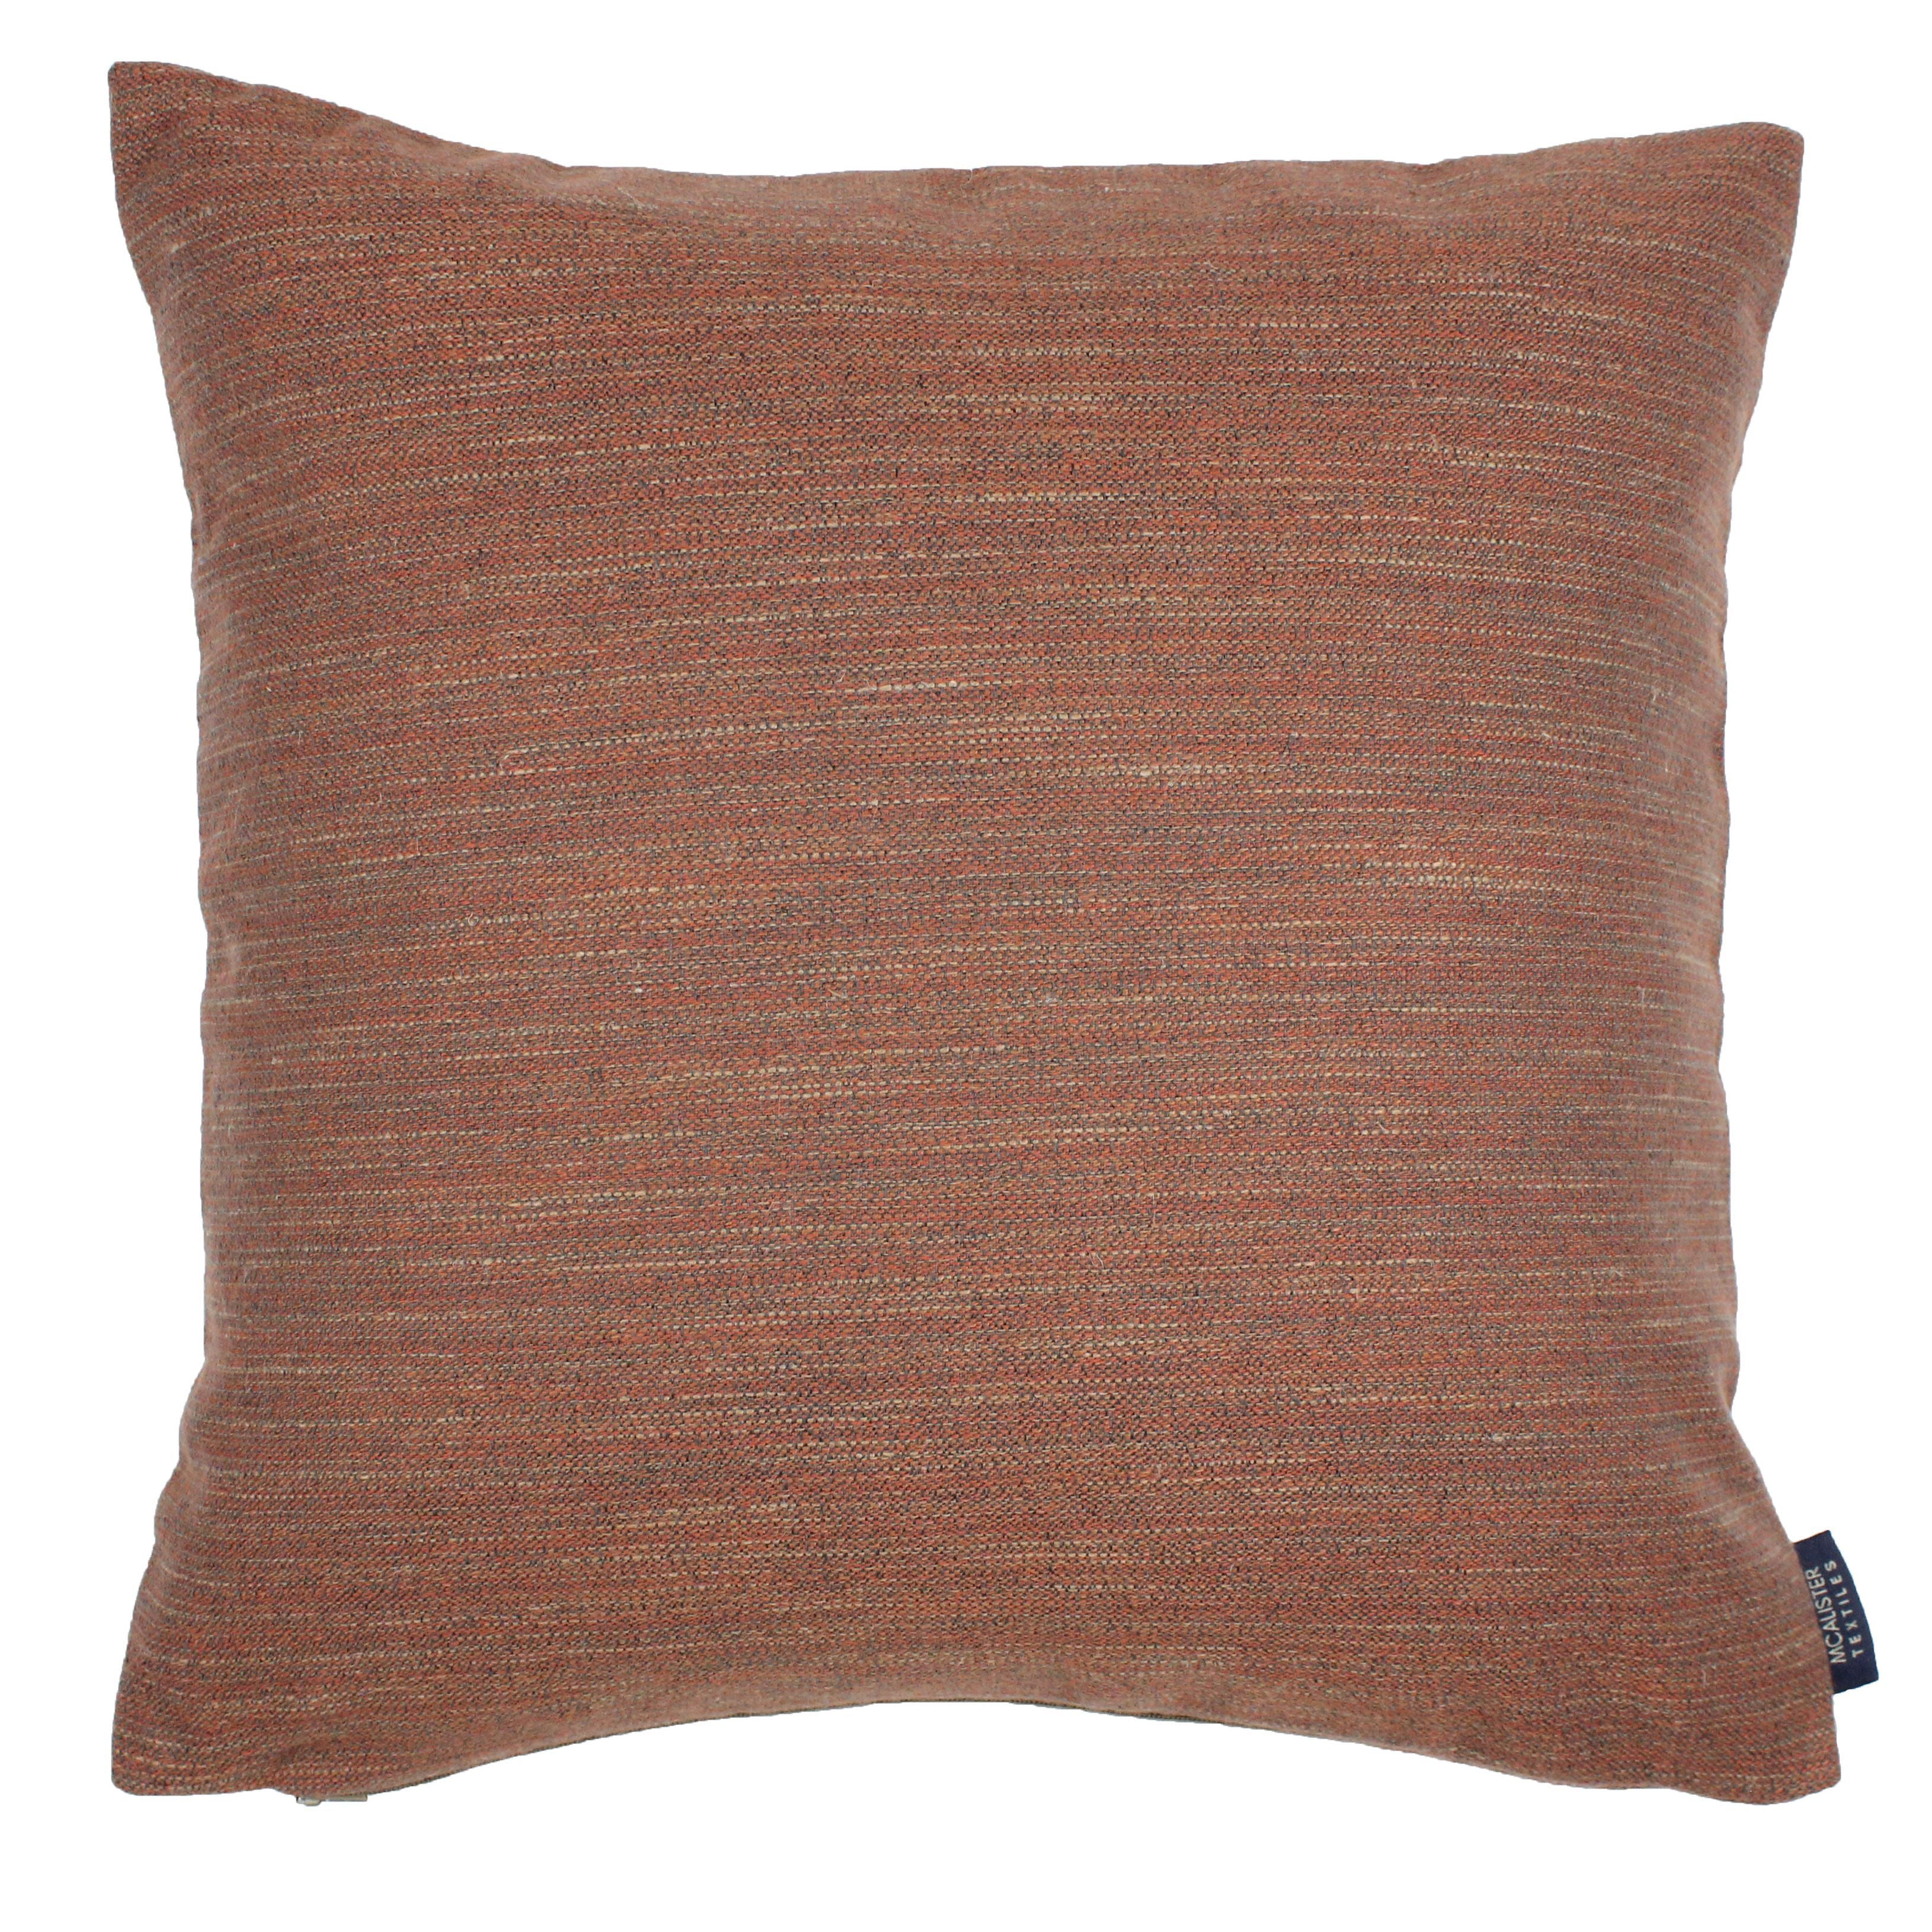 McAlister Textiles Hamleton Terracotta Textured Plain Cushion Cushions and Covers Cover Only 43cm x 43cm 